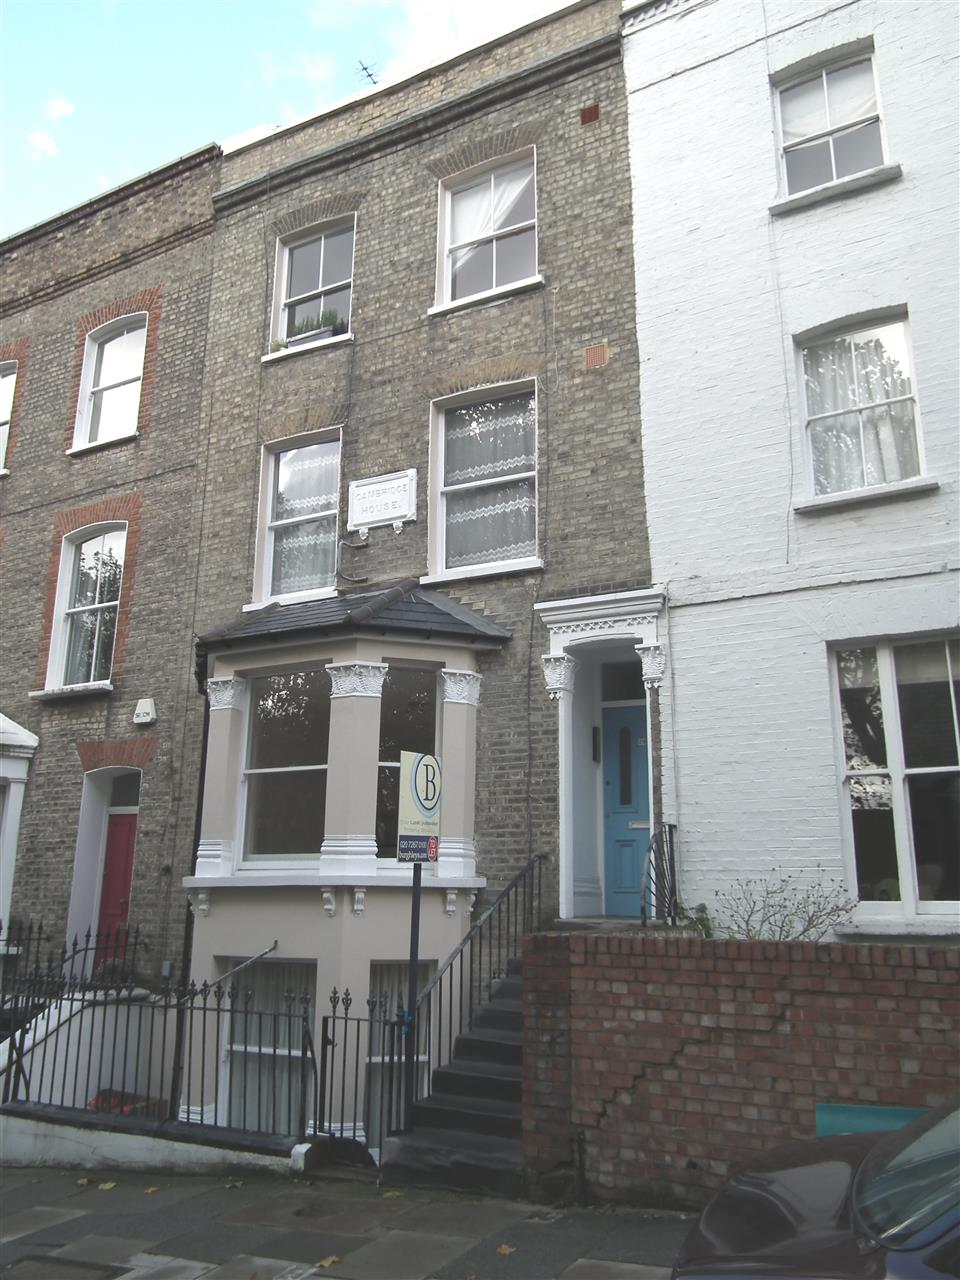 2 bed flat to rent in Churchill Road - Property Image 1